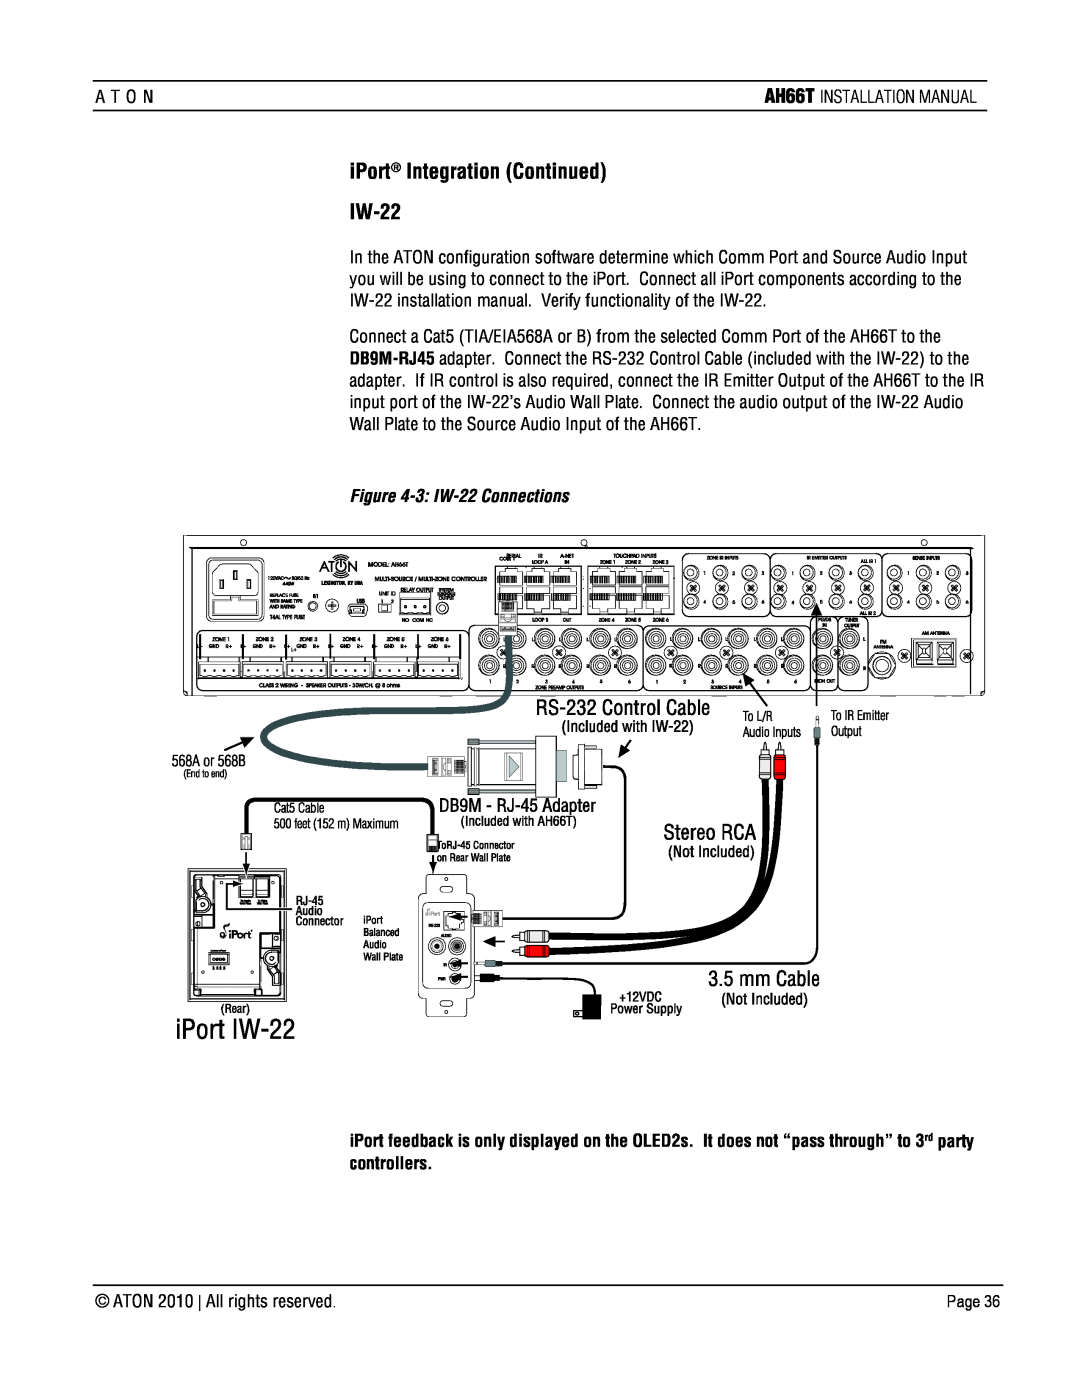 ATON AH66T-KT installation manual iPort Integration Continued IW-22, 3: IW-22Connections 